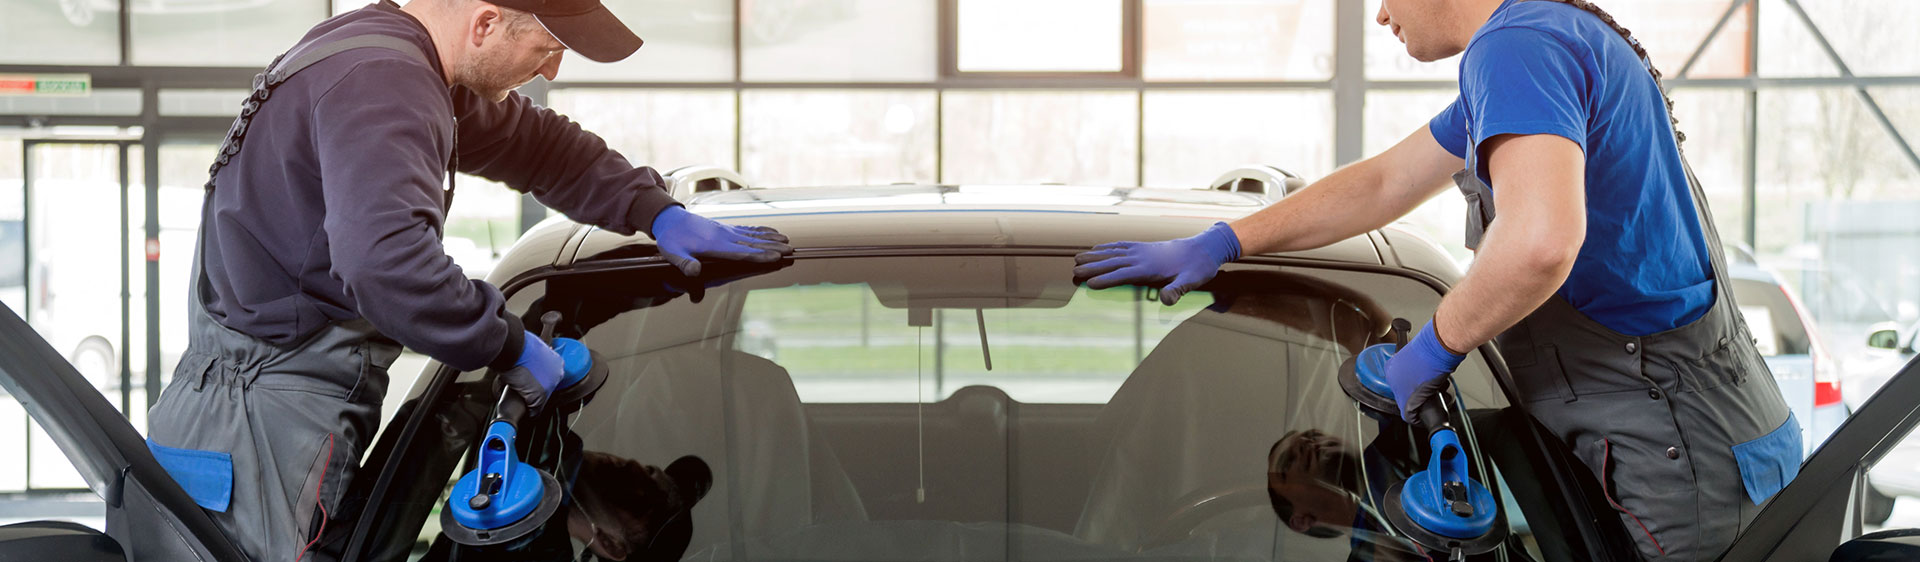 Temecula Windshield Repair, Windshield Replacement and Auto Glass Repair